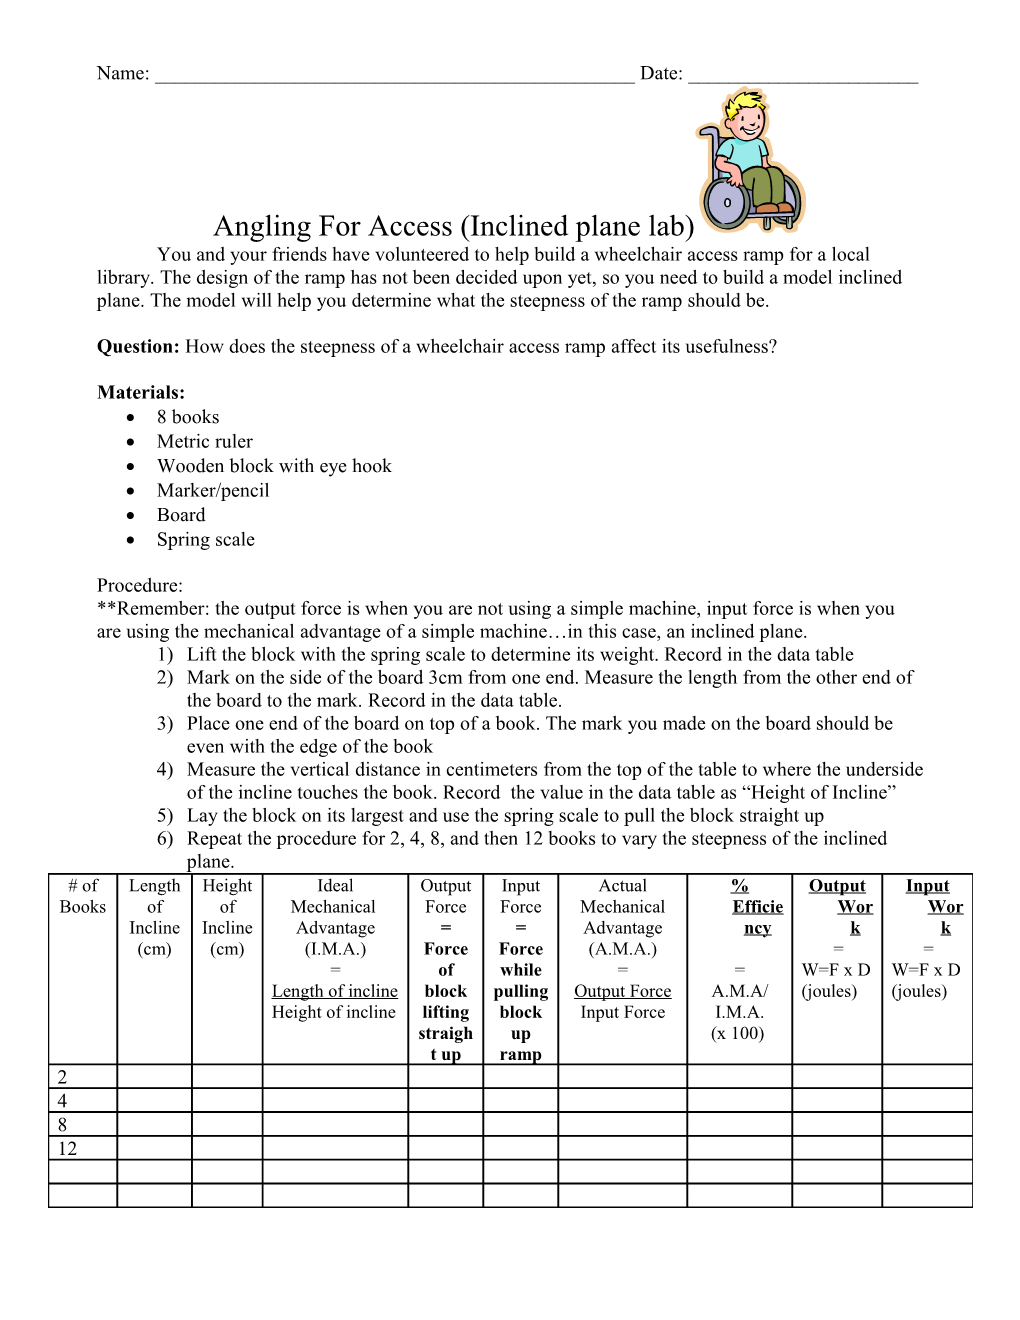 Angling for Access (Inclined Plane Lab)